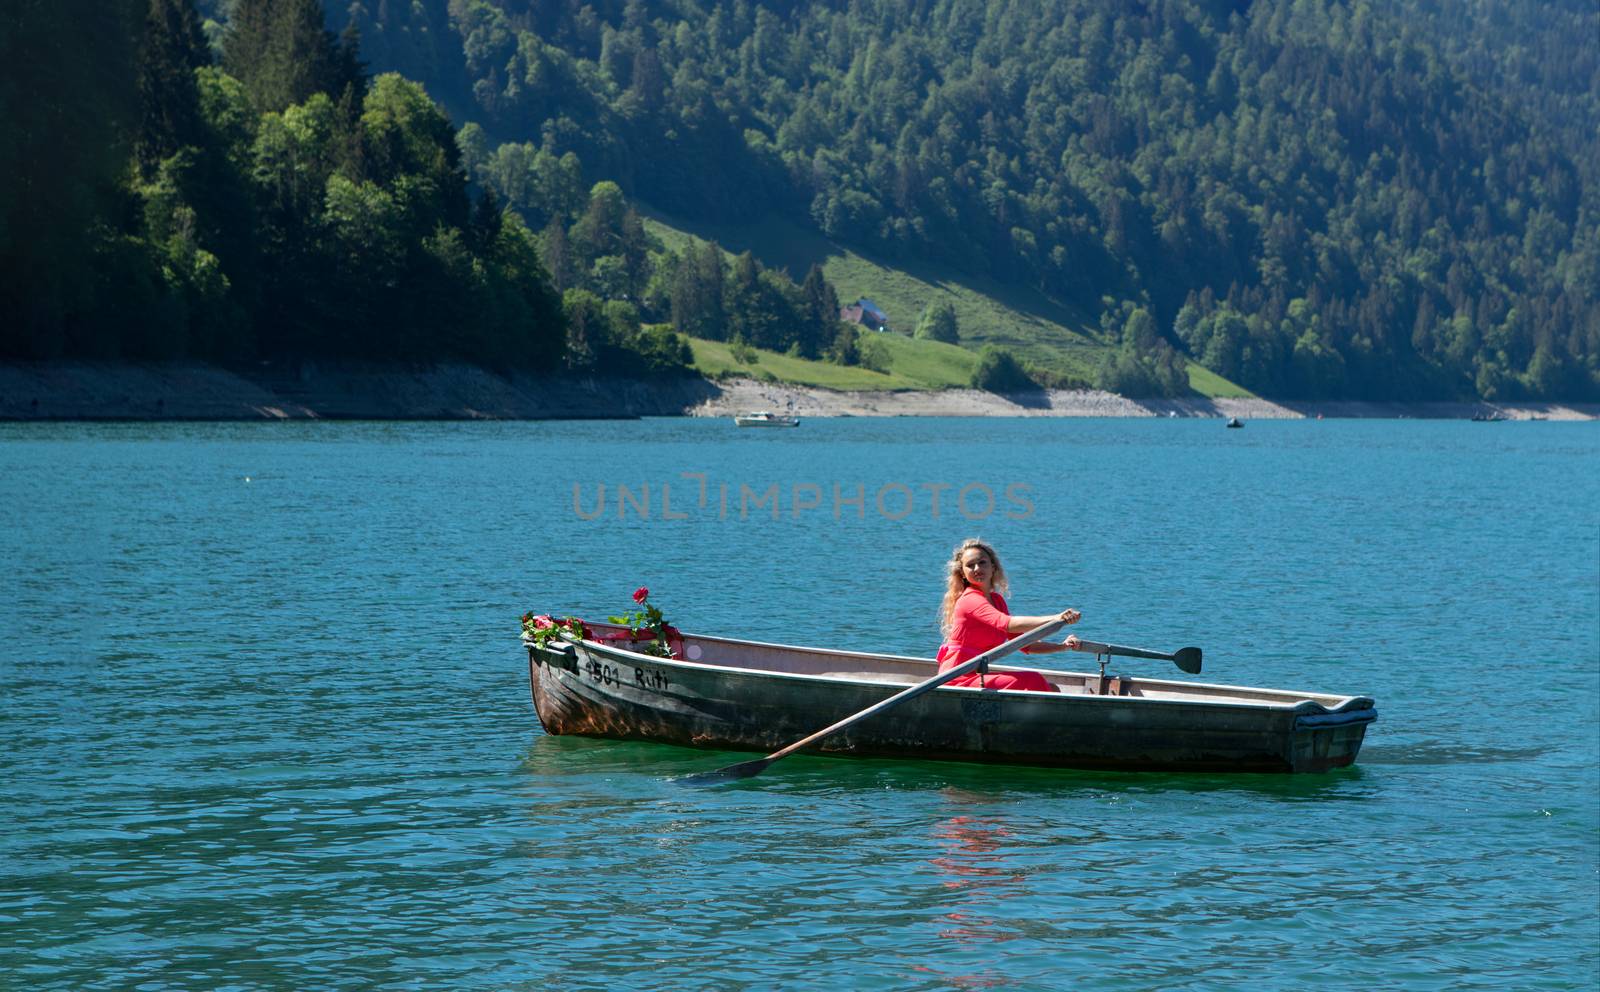 romantic scene with female model with long blond hair on a boat. by PeterHofstetter